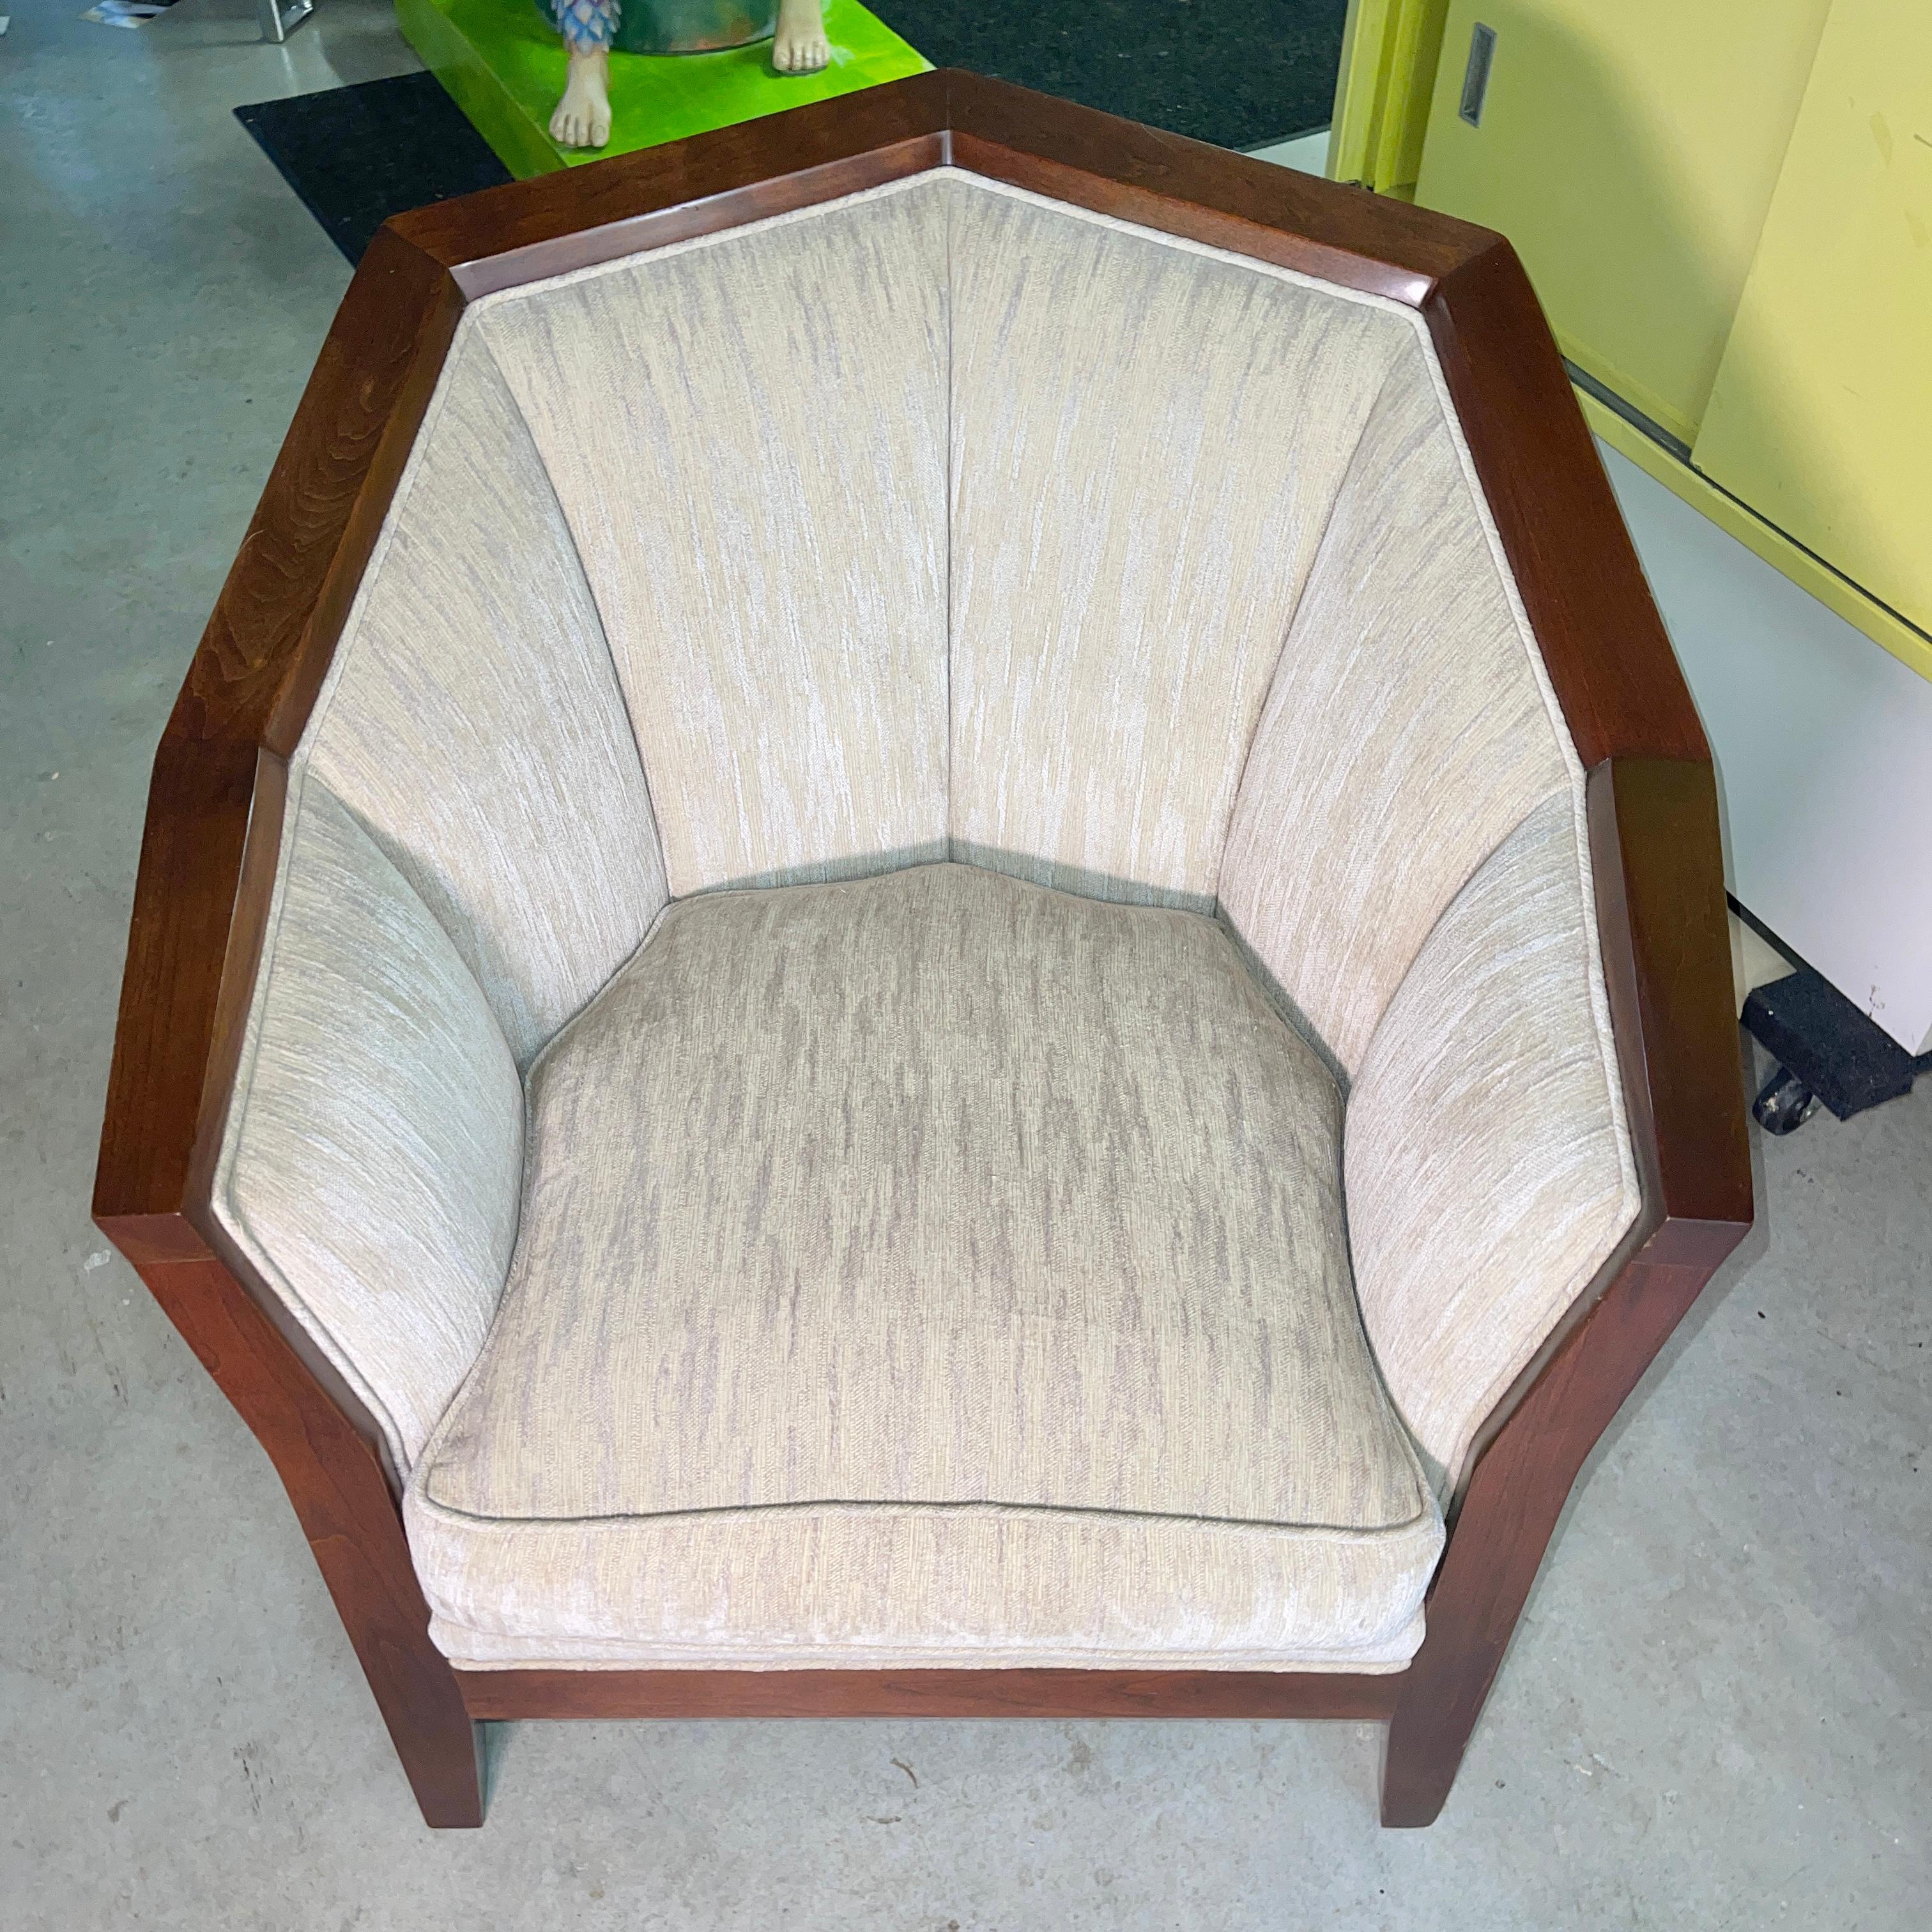 John Widdicomb upholstered club chair in cherry wood frame styled after Pierre Chareau's iconic Fauteuil MF172.

Overall dimensions: 33” W x 32 1/2” D x 31” H
Seat height 18 3/4”, Seat depth 19 3/4” Arm height 25”

Very clean overall. 

Per